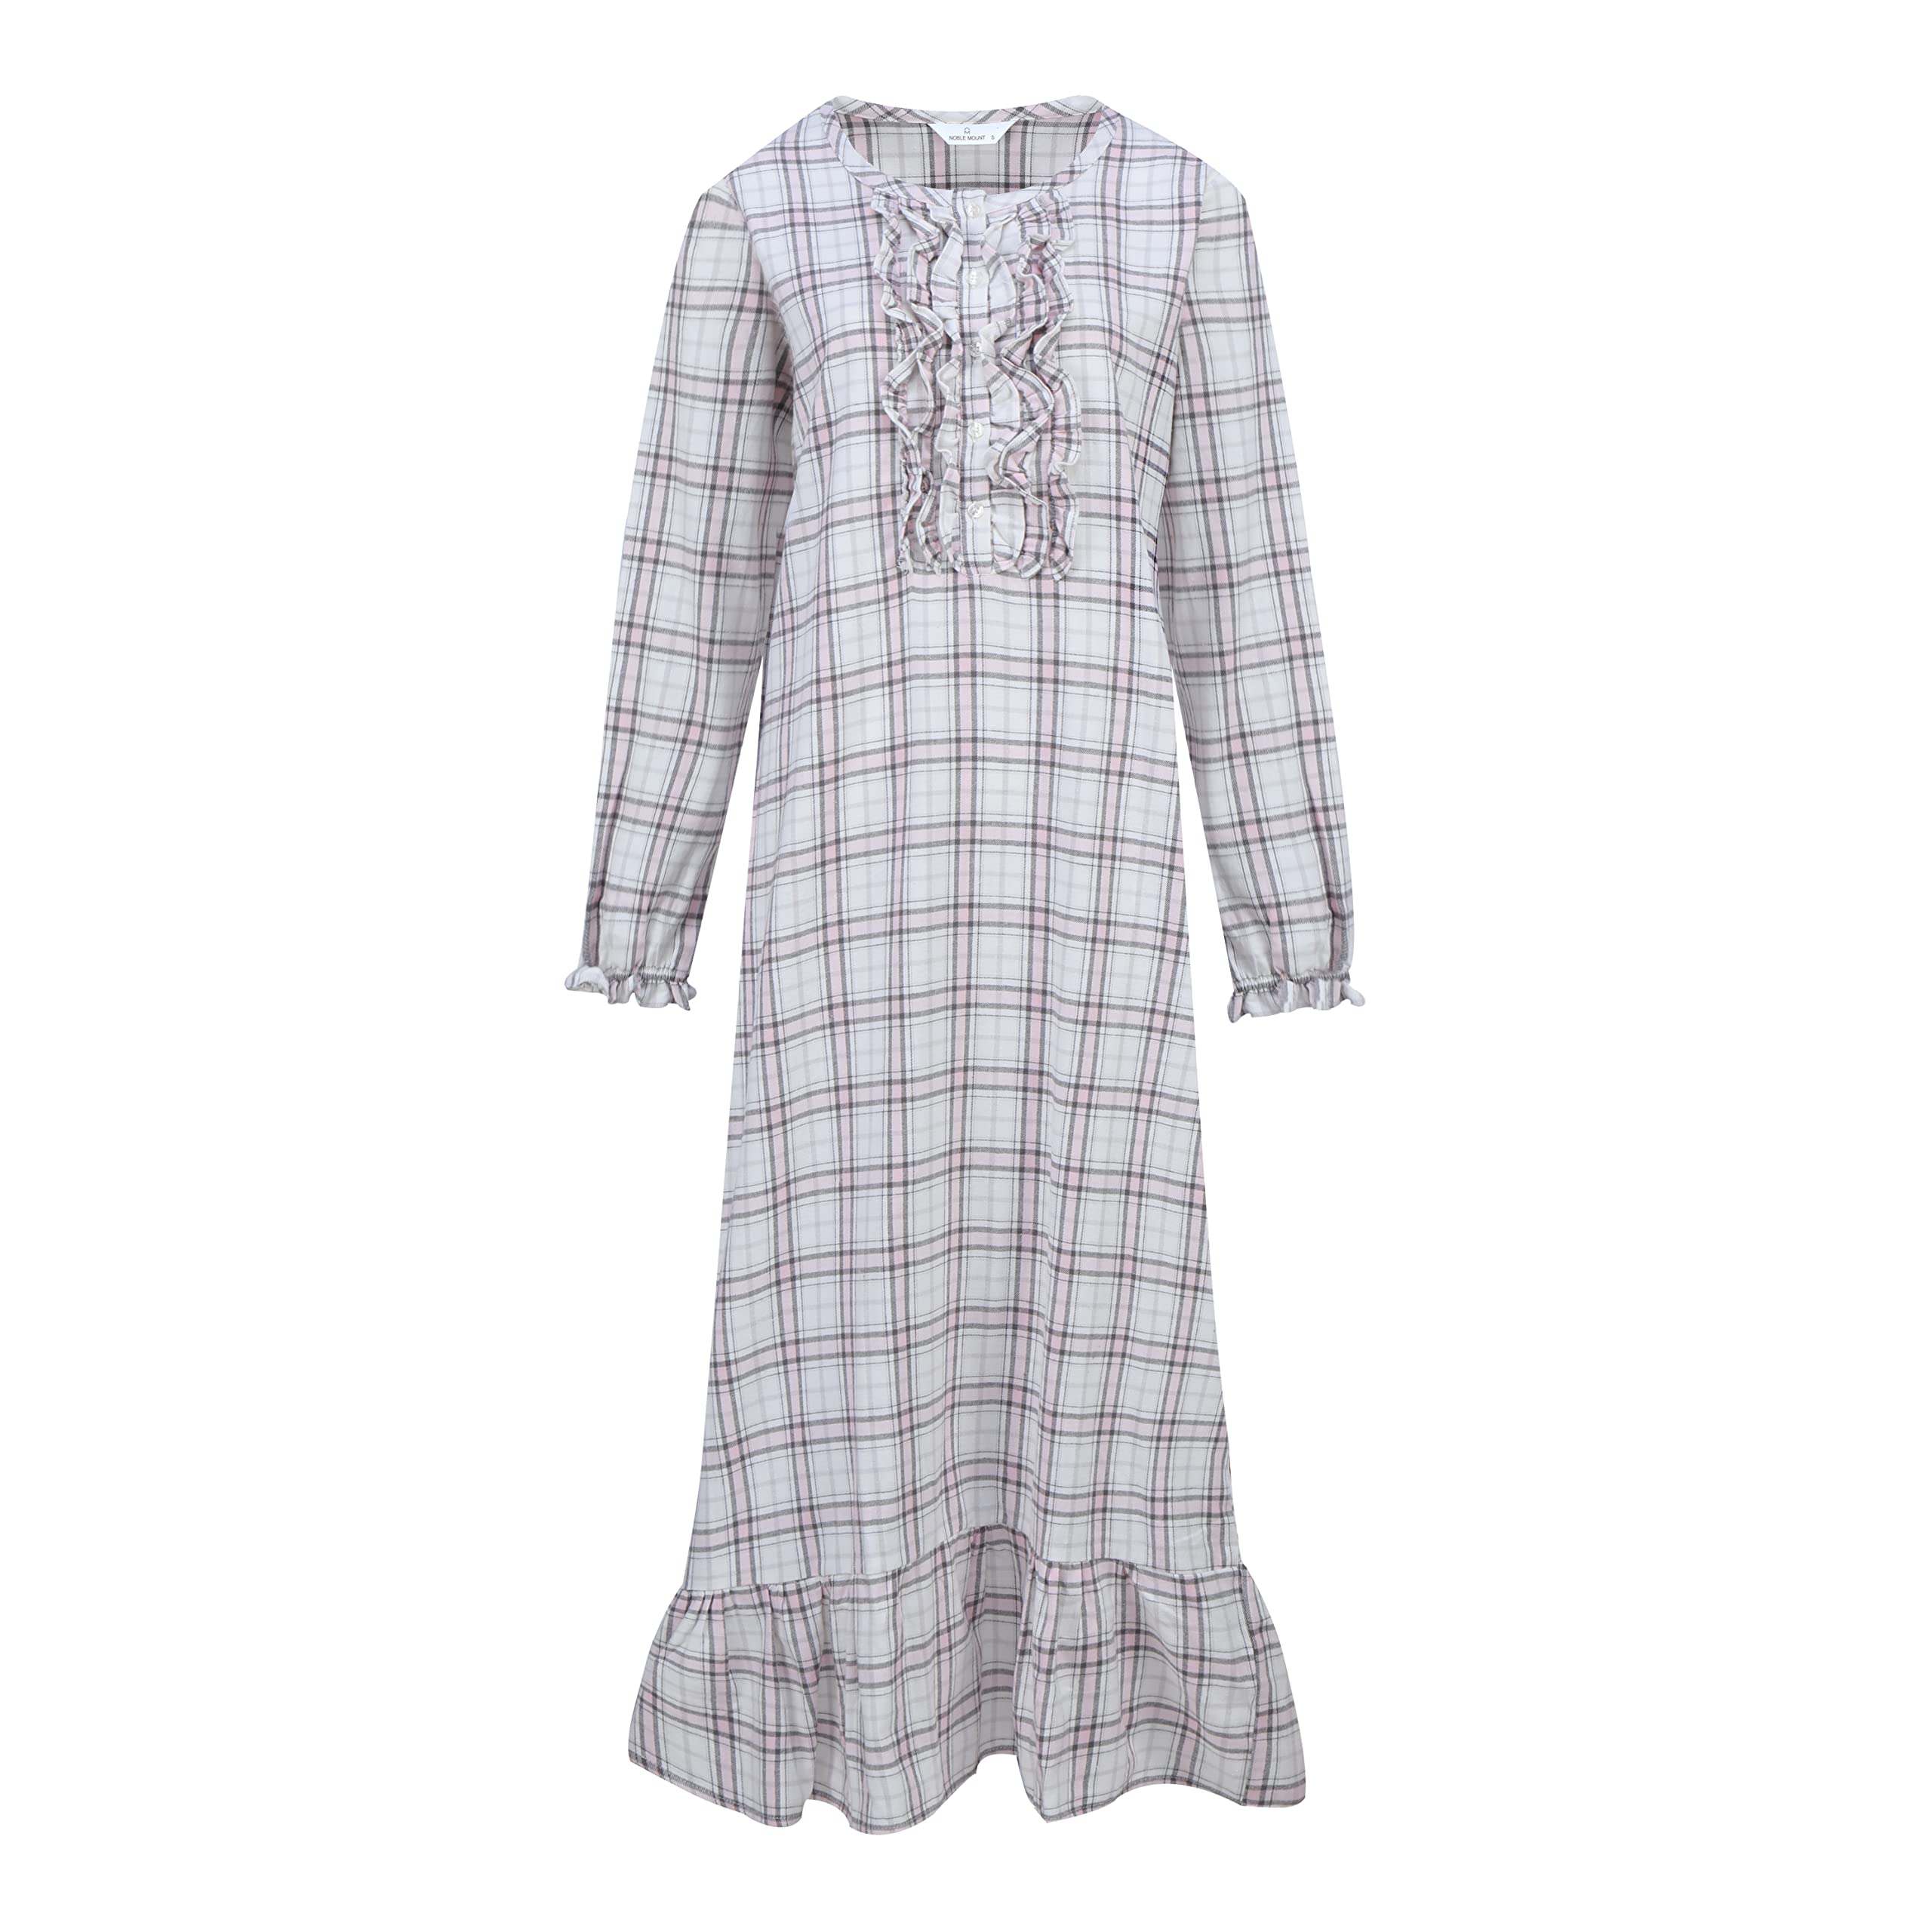 Women's Premium Flannel Long Gown - Plaid Pink White Gray